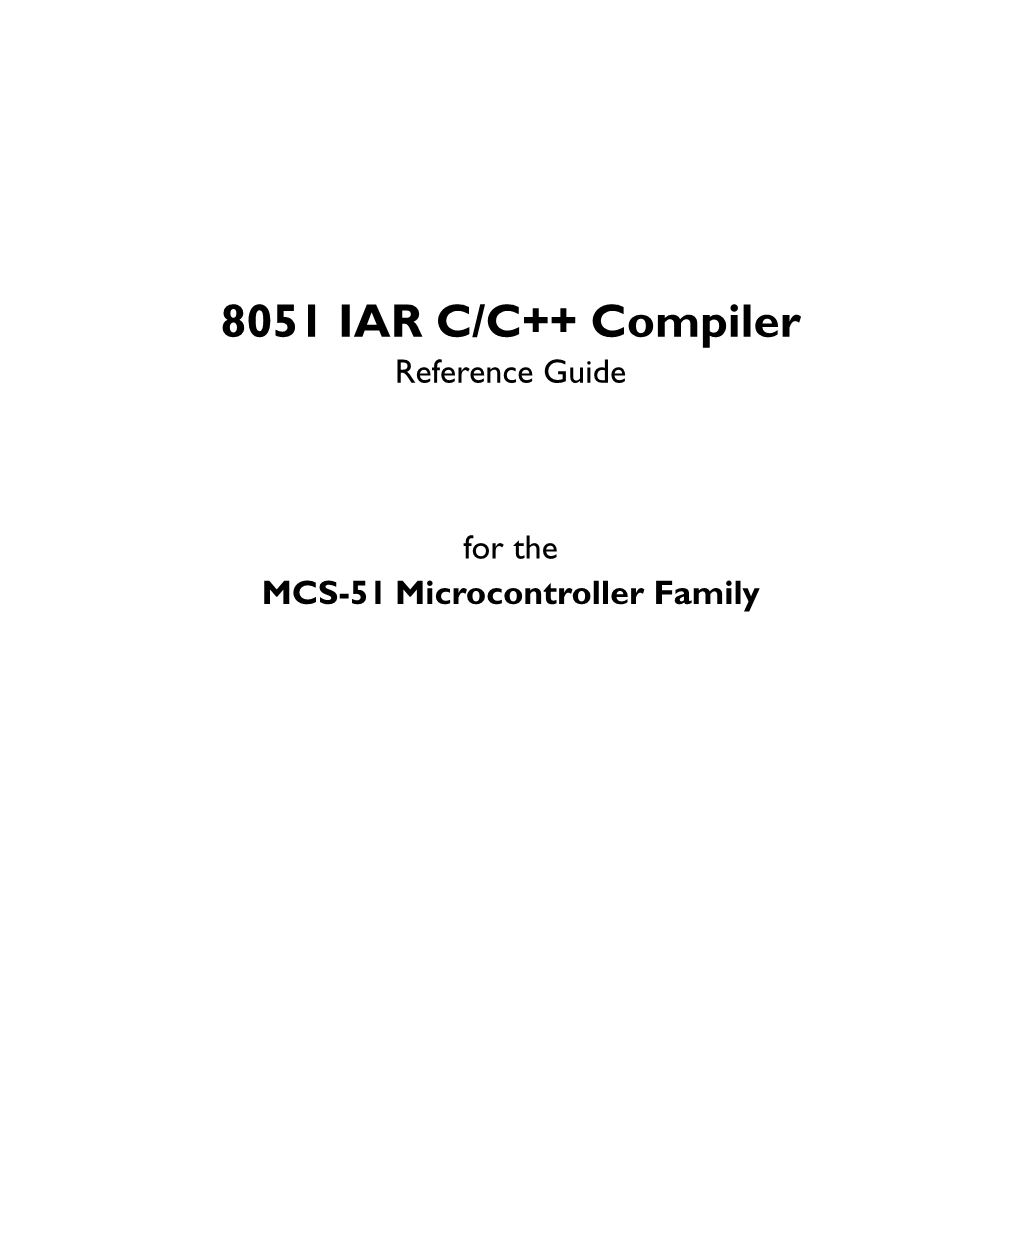 8051 IAR C/C++ Compiler Reference Guide